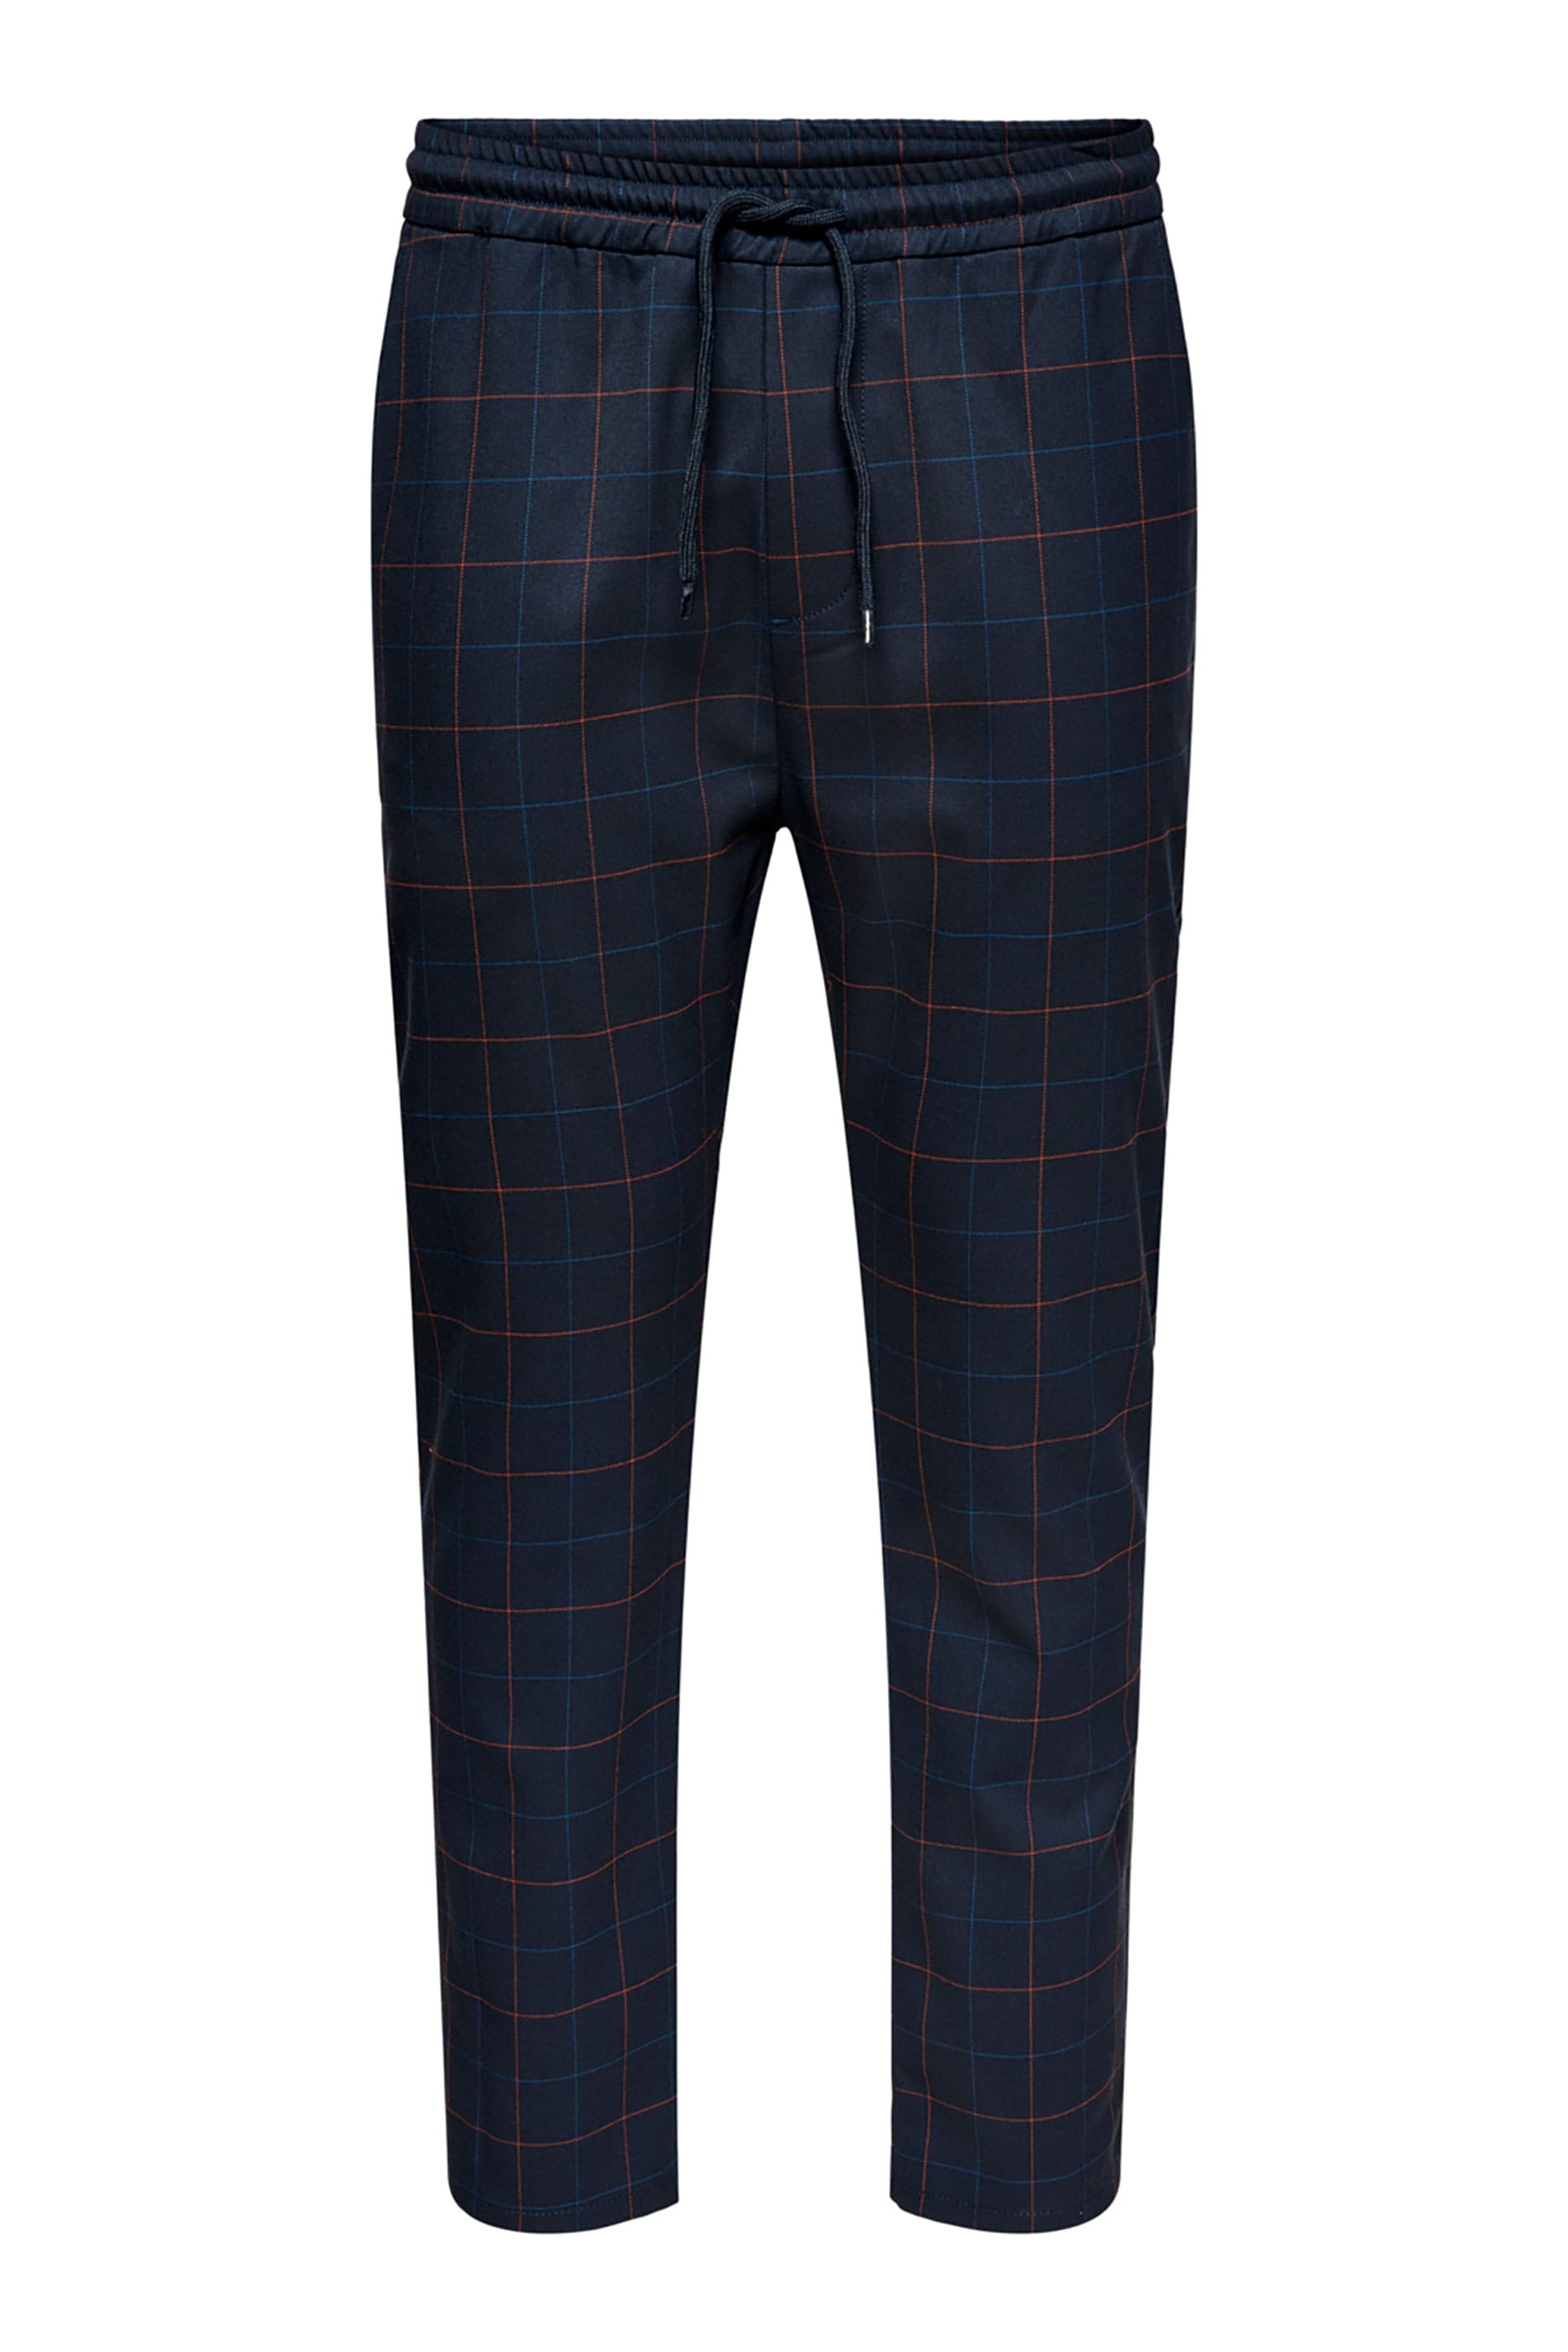 ONLY & SONS Big & Tall Navy Blue Check Trousers 1